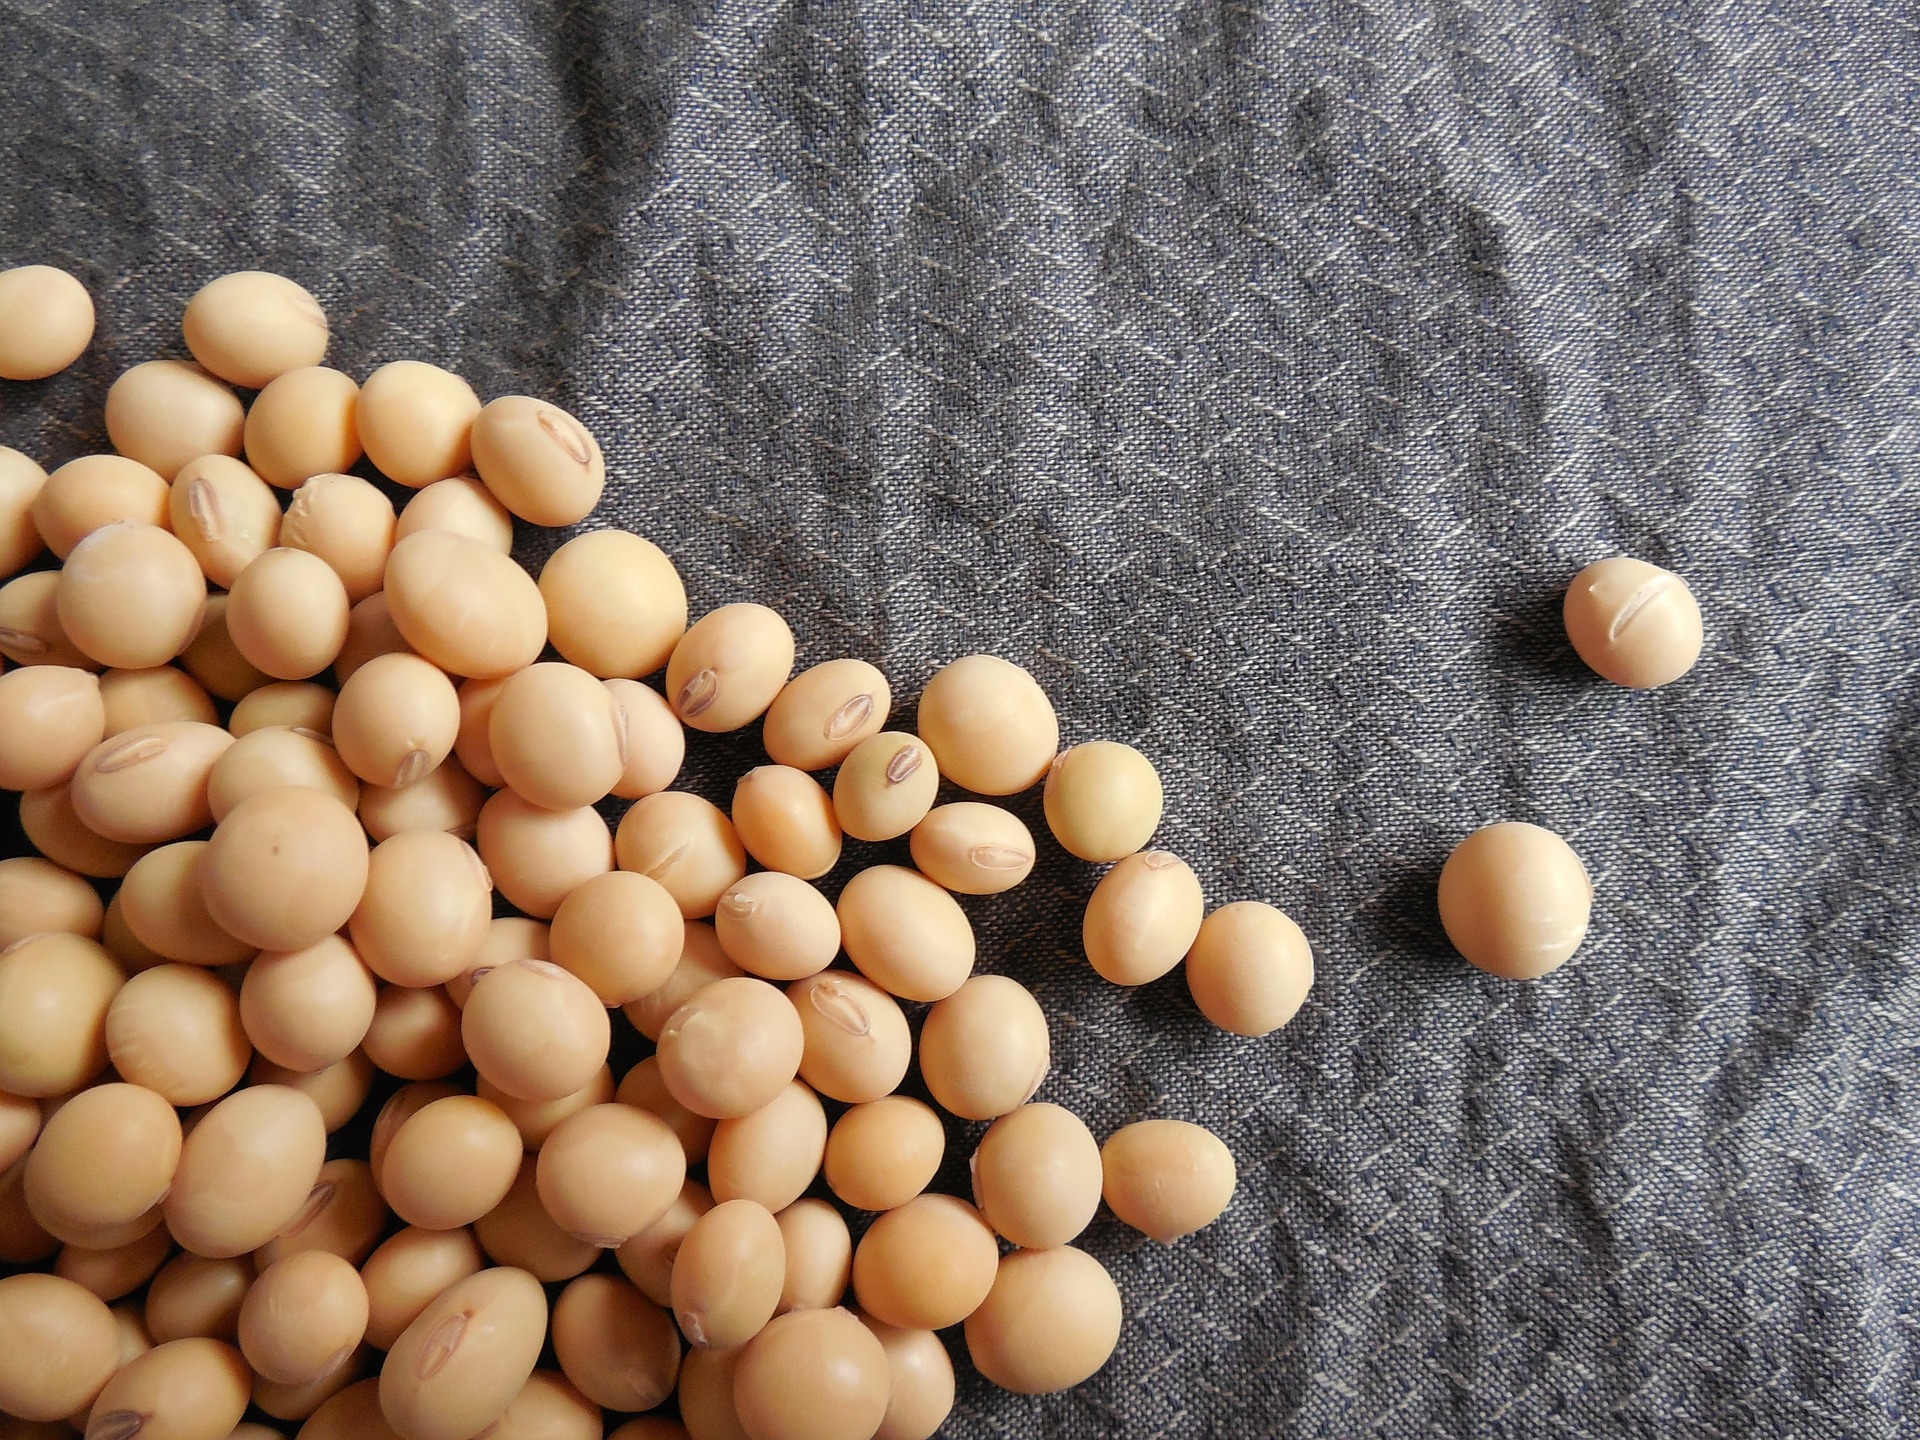 A small pile of harvested non-gmo soybeans on a grey cloth.